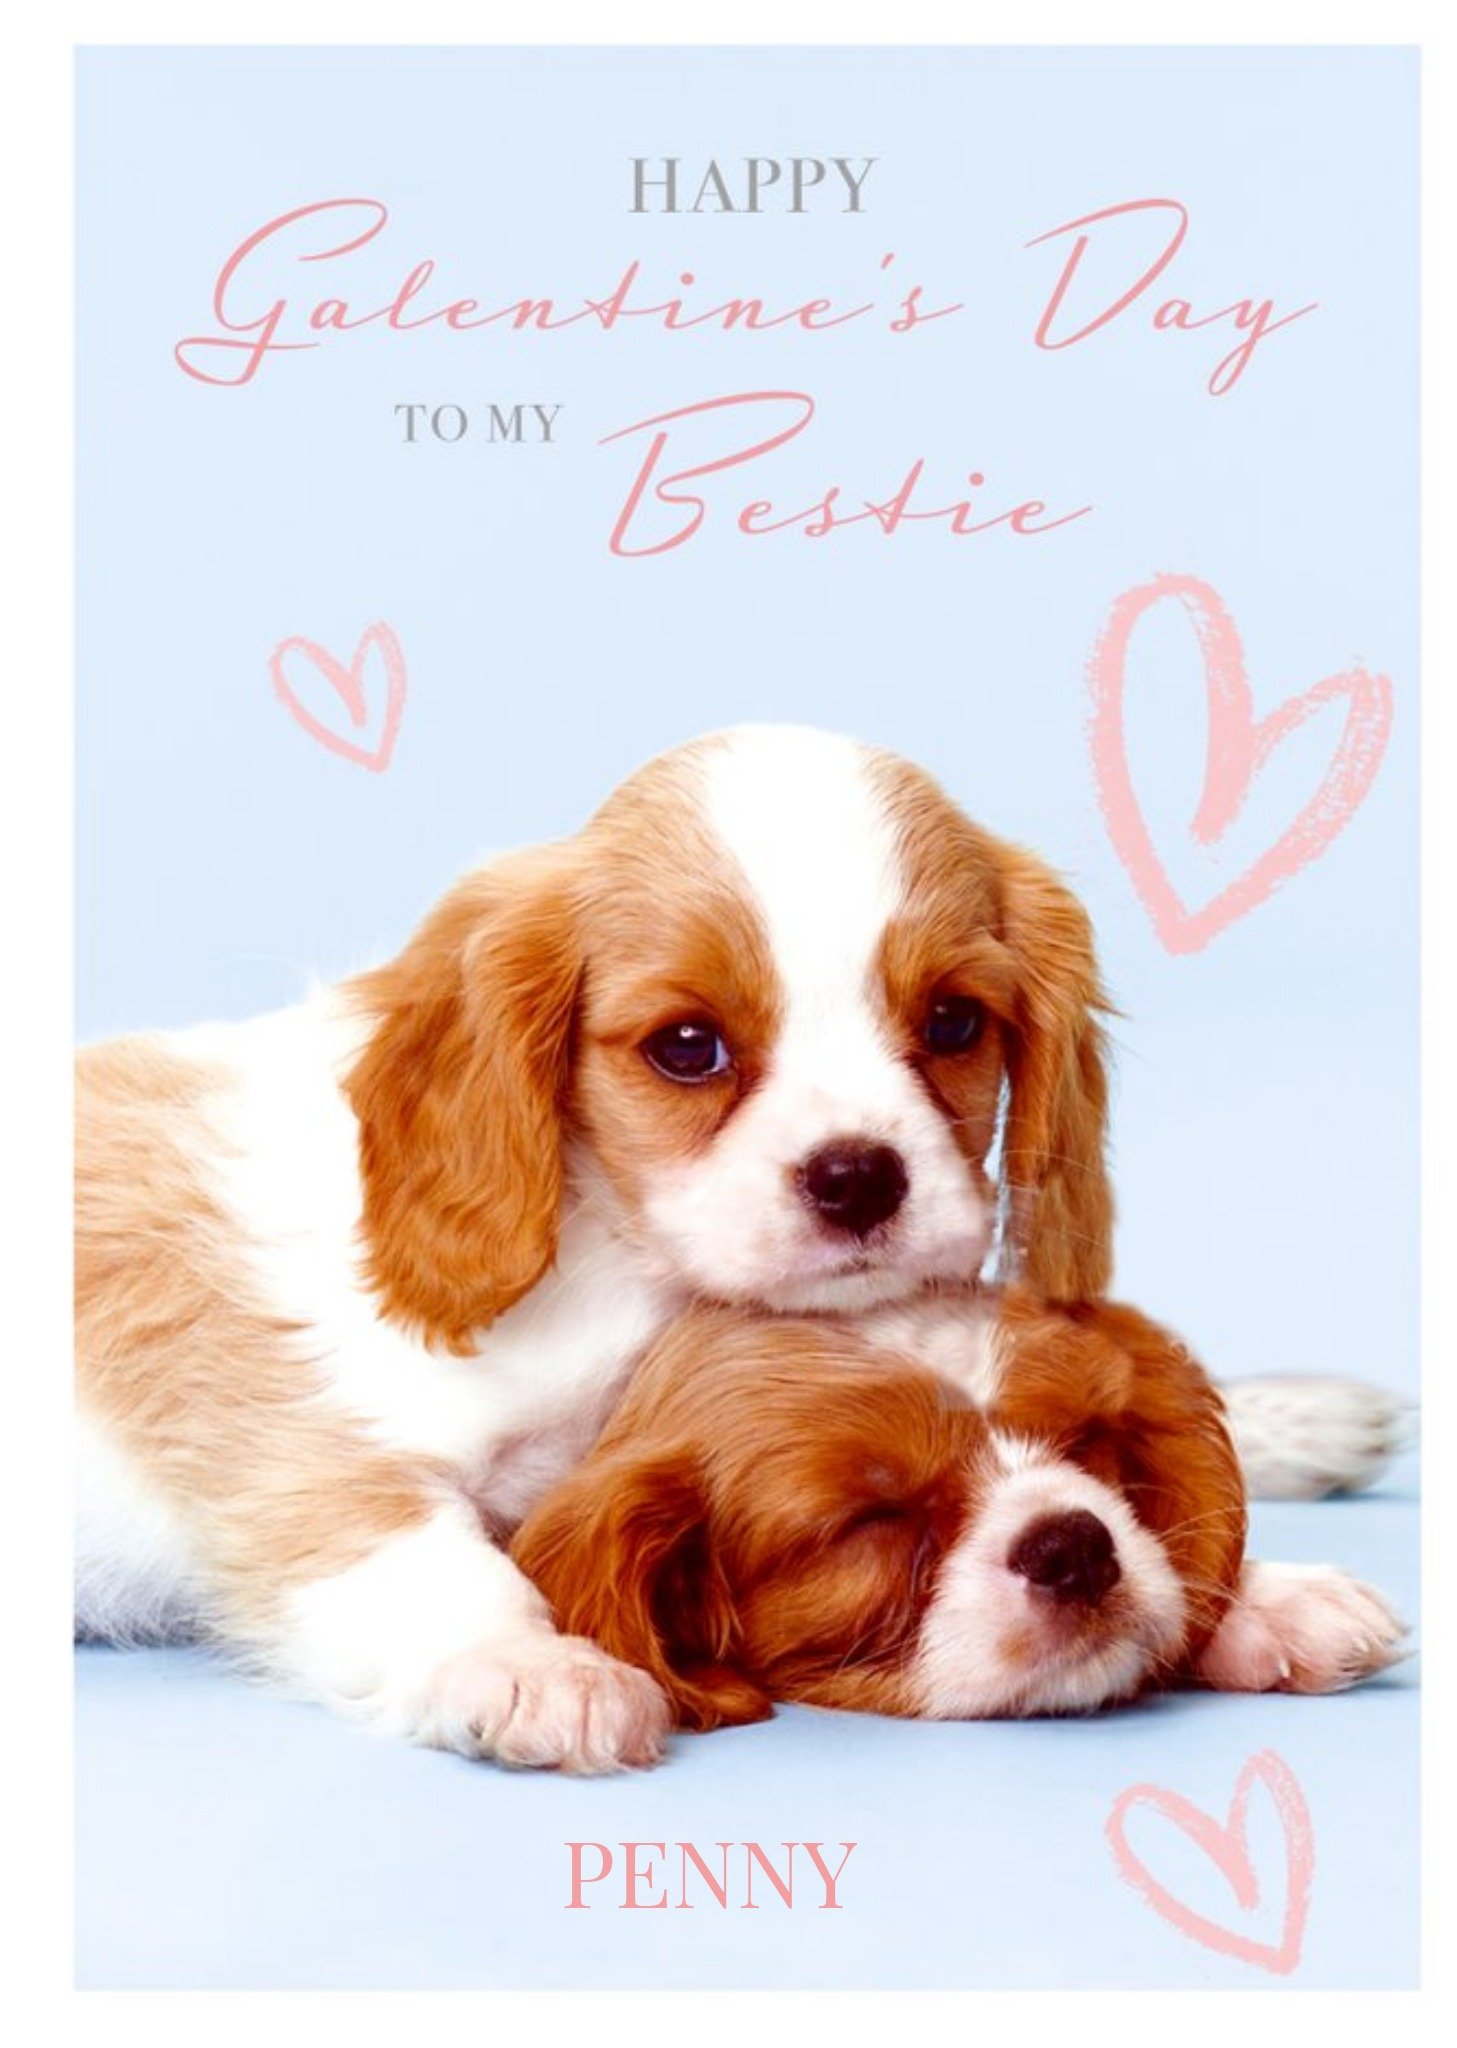 Moonpig Animal Planet Puppy Galentine's Day Card, Large